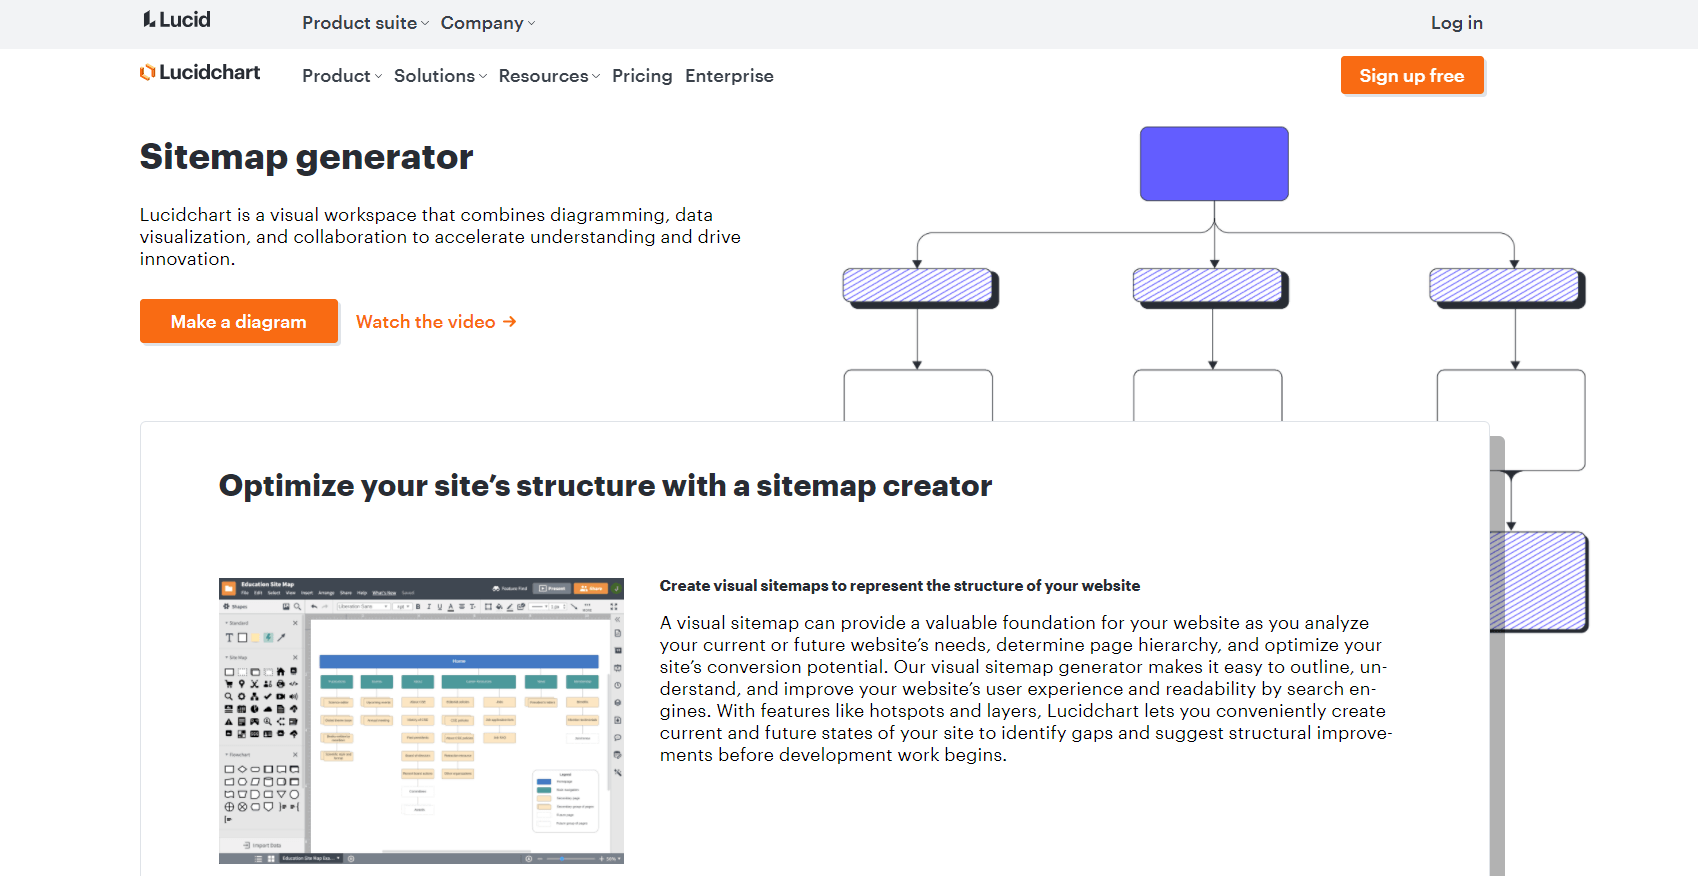 Lucidchart has its very own sitemap builder along with the rest of its diagramming tools